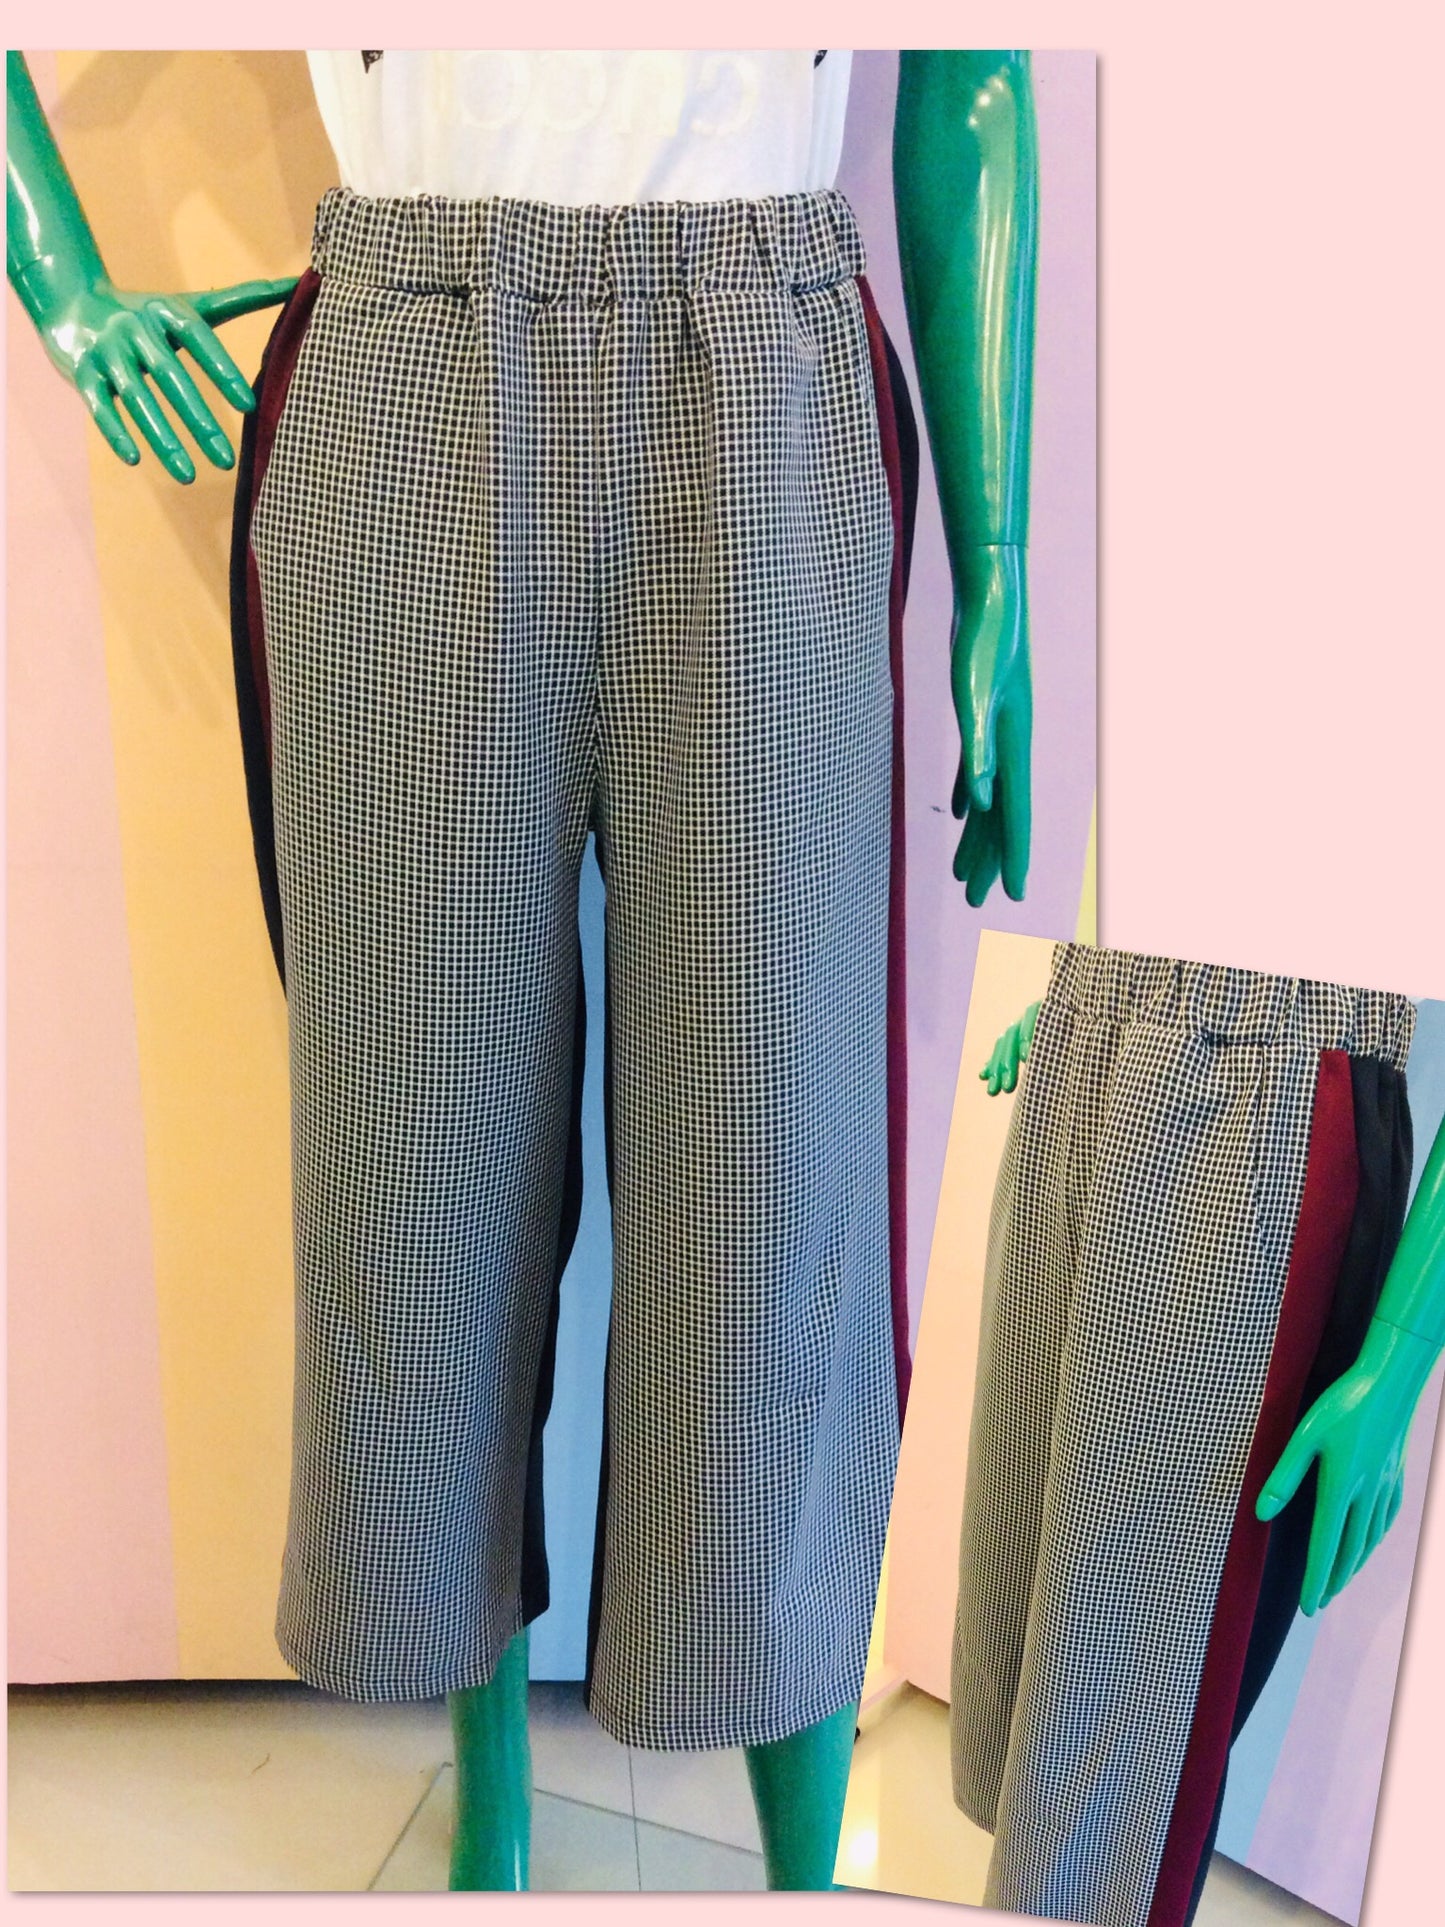 Elastic Waist Square Pants Checkered Front w/ Lining